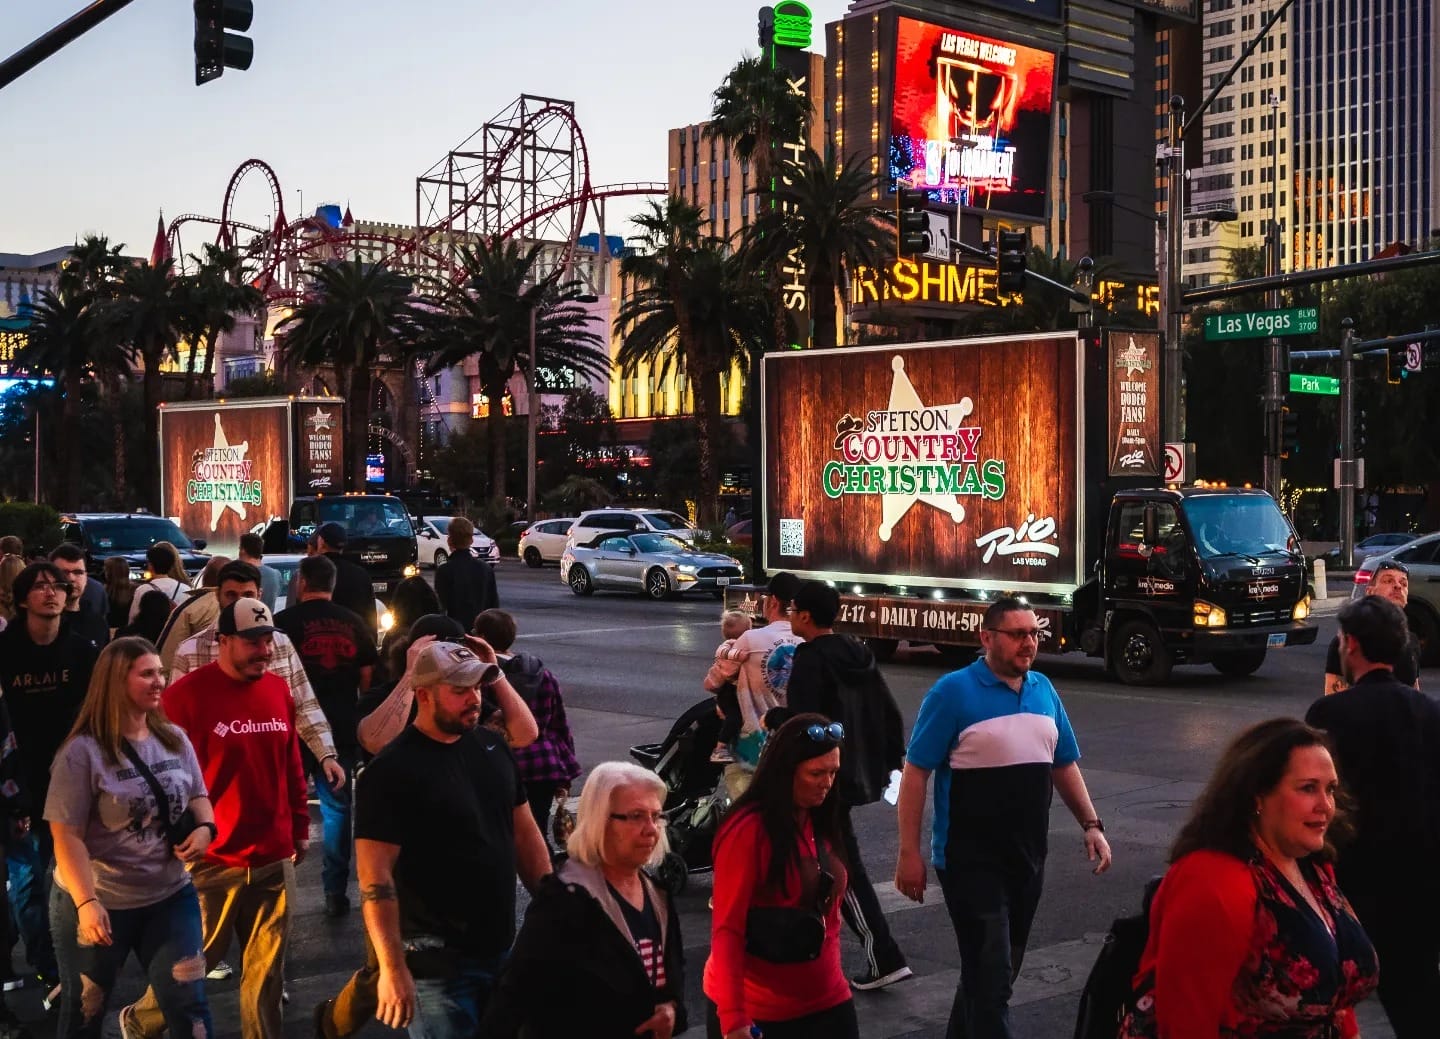 Stetson Country Christmas at the Rio: Celebrating the Spirit of Rodeo during NFR in Las Vegas